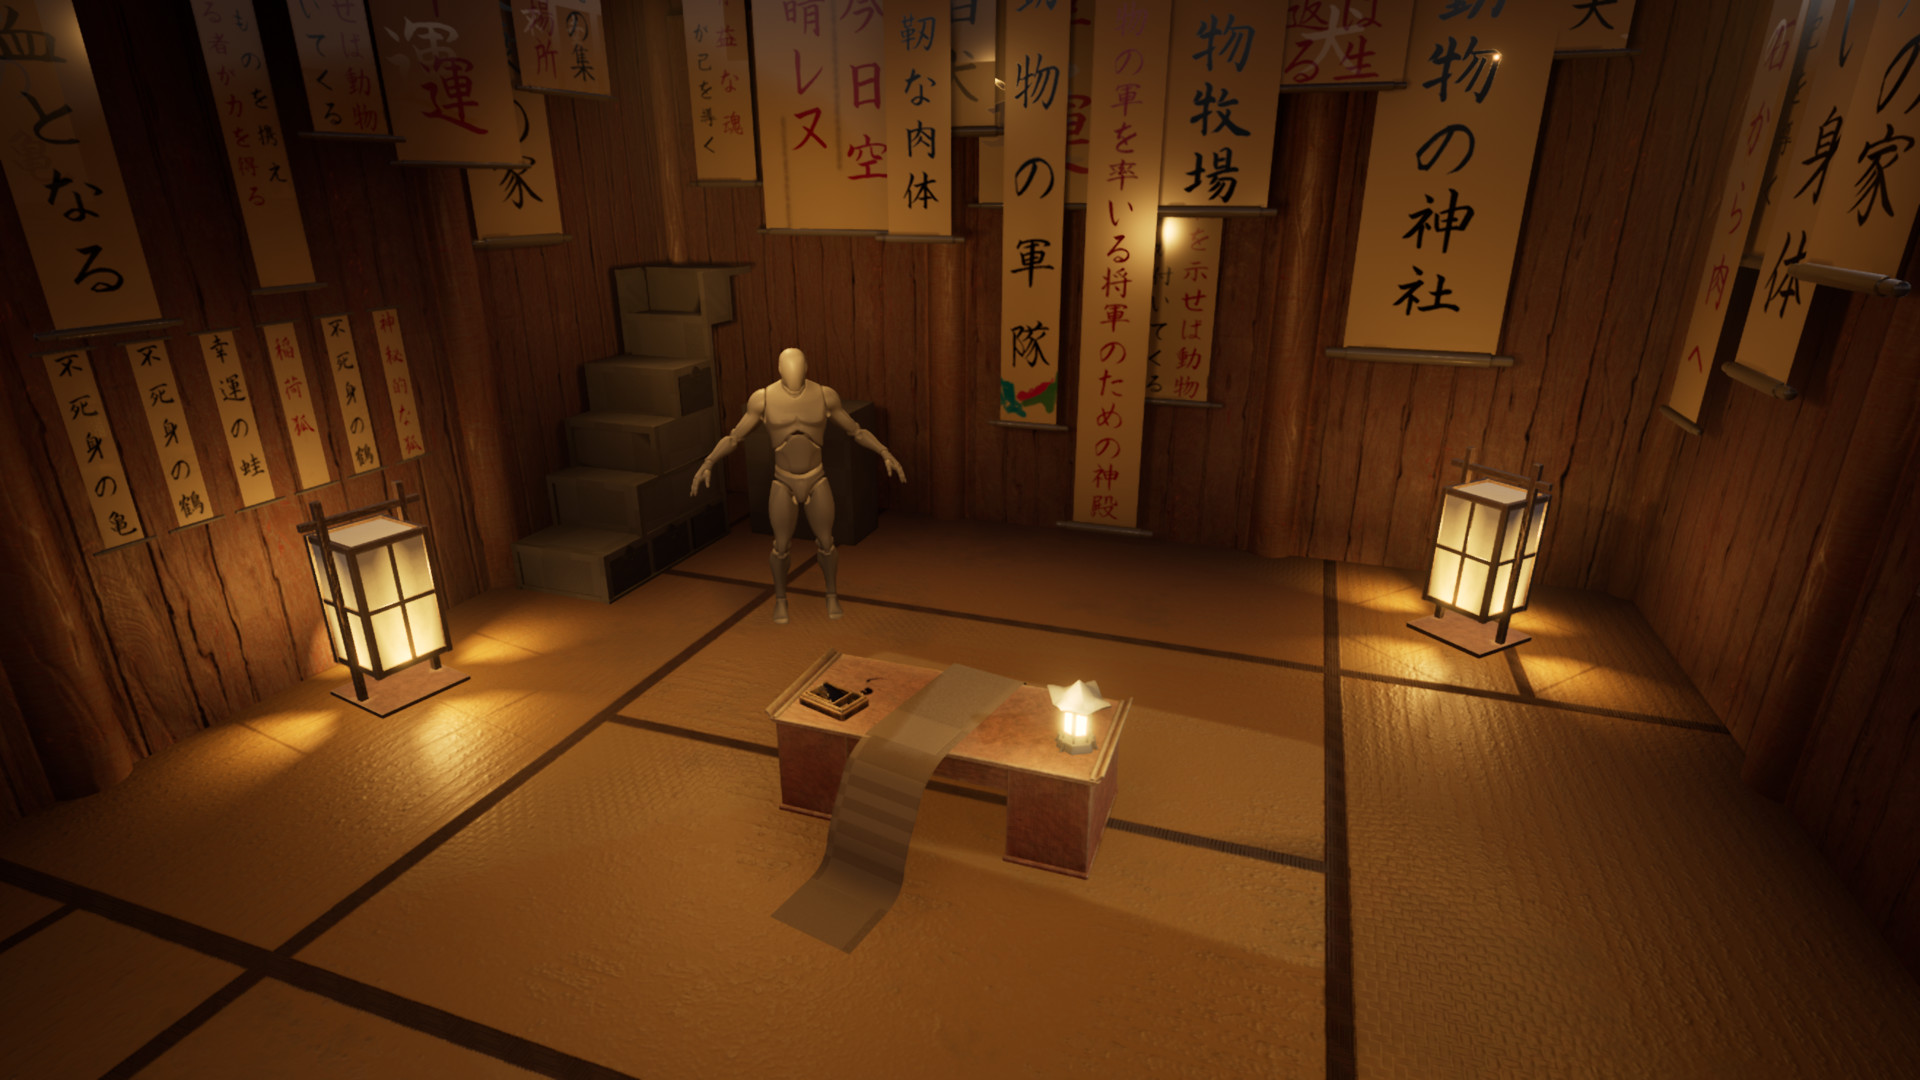 Interior screenshot of the calligraphers hut. The walls are now textured and make the fortune writing scrolls hanging on the walls pop out. The floor has a texture too. There are square lamp props throwing yellow lights in all directions. In the middle is the writing desk.